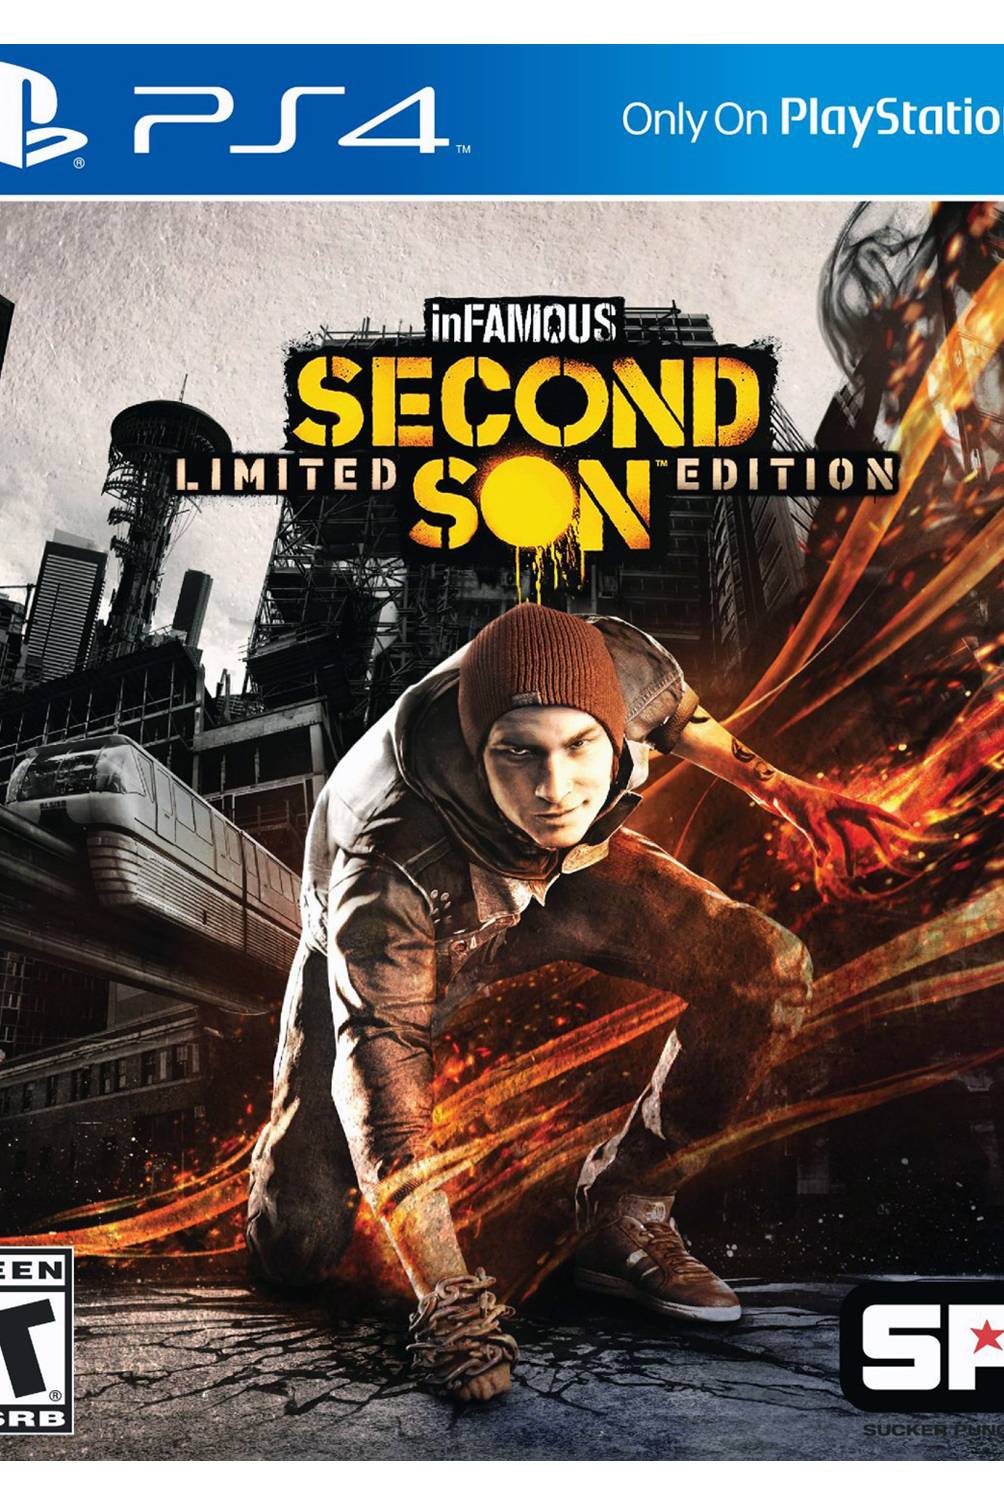 PLAYSTATION - INFAMOUS SECOND SON PS4